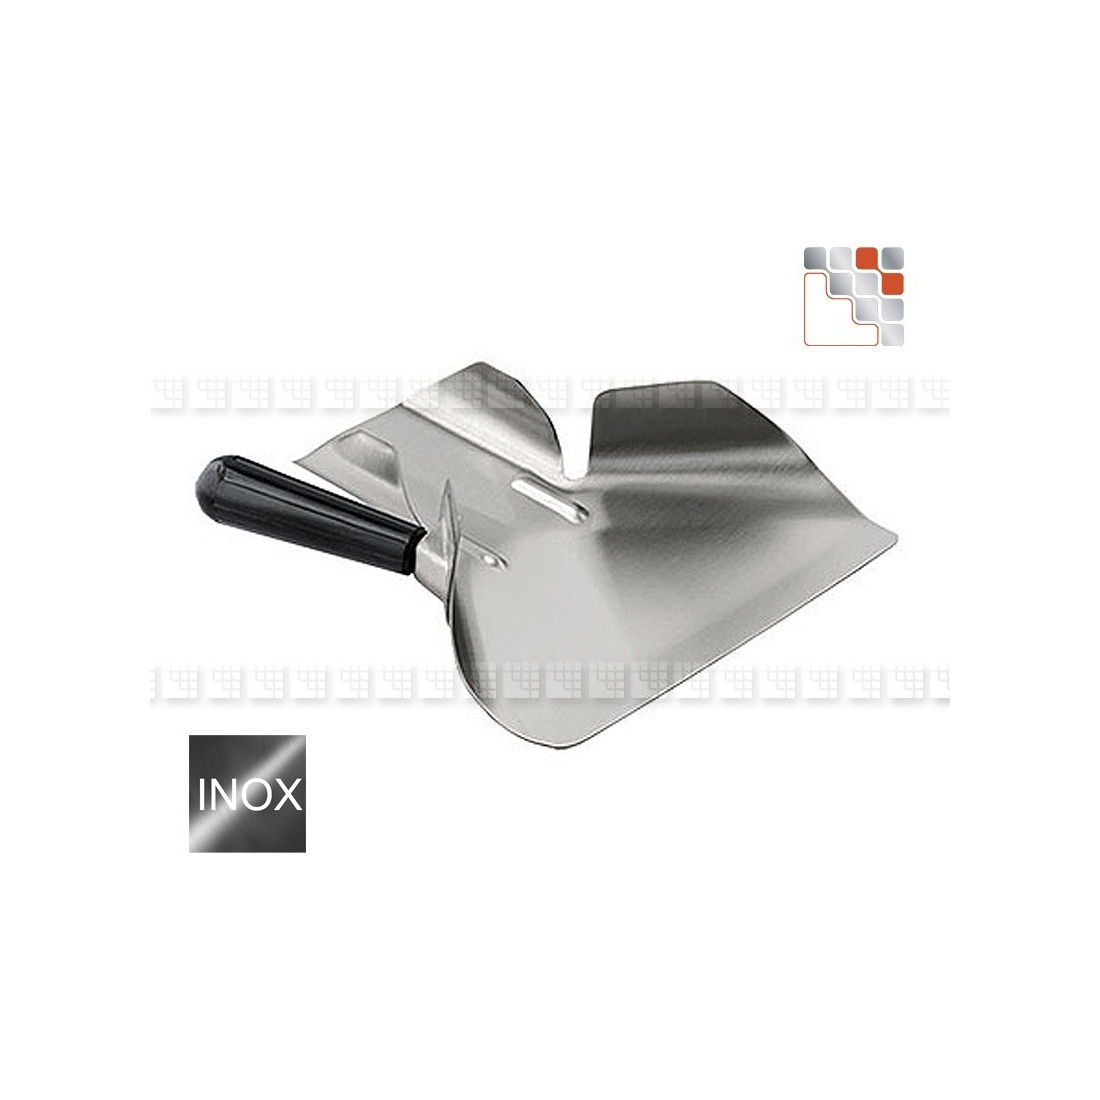 Mussels shovel 18/10 stainless steel LACOR A17-PMF A la Plancha® Cutlery